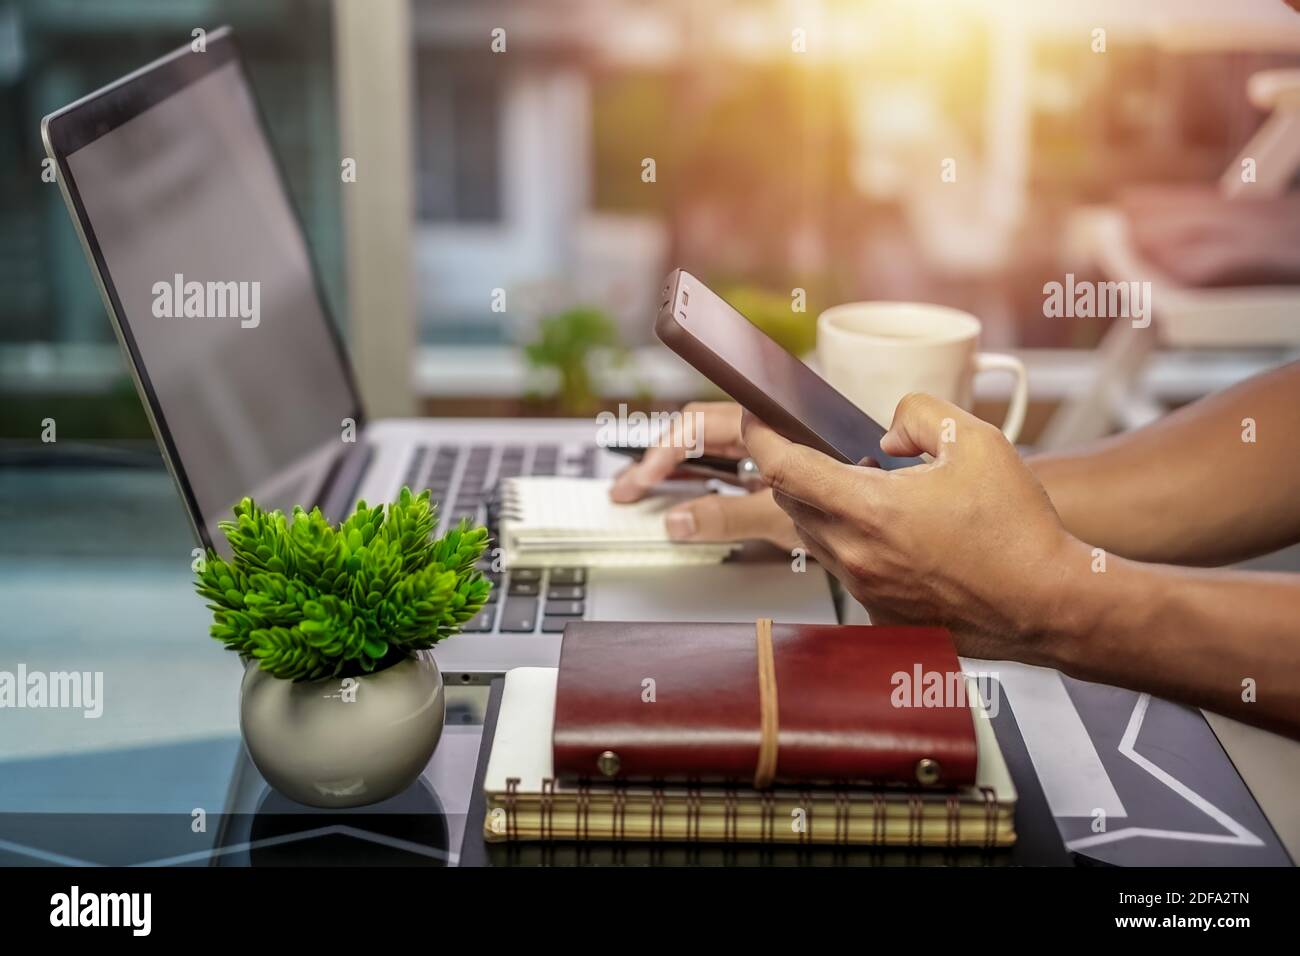 Holding a smart phone while working on laptop at home office. Freelance lifestyle. Stock Photo